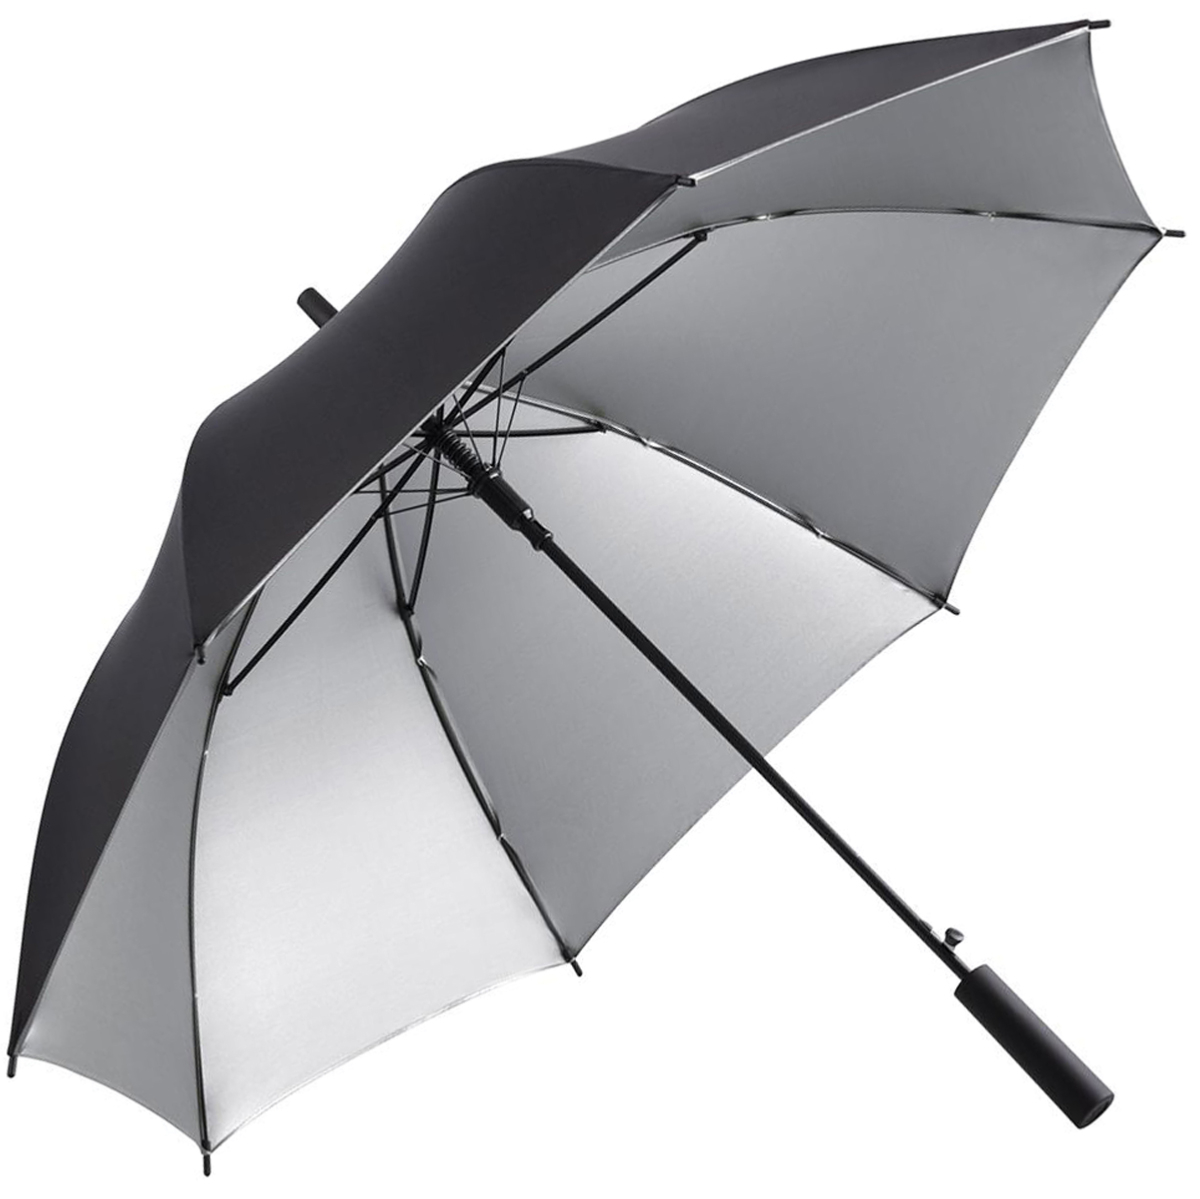 UV Protective SPF50+ Two-Tone Automatic Opening Walking Length Umbrella - Black & Silver